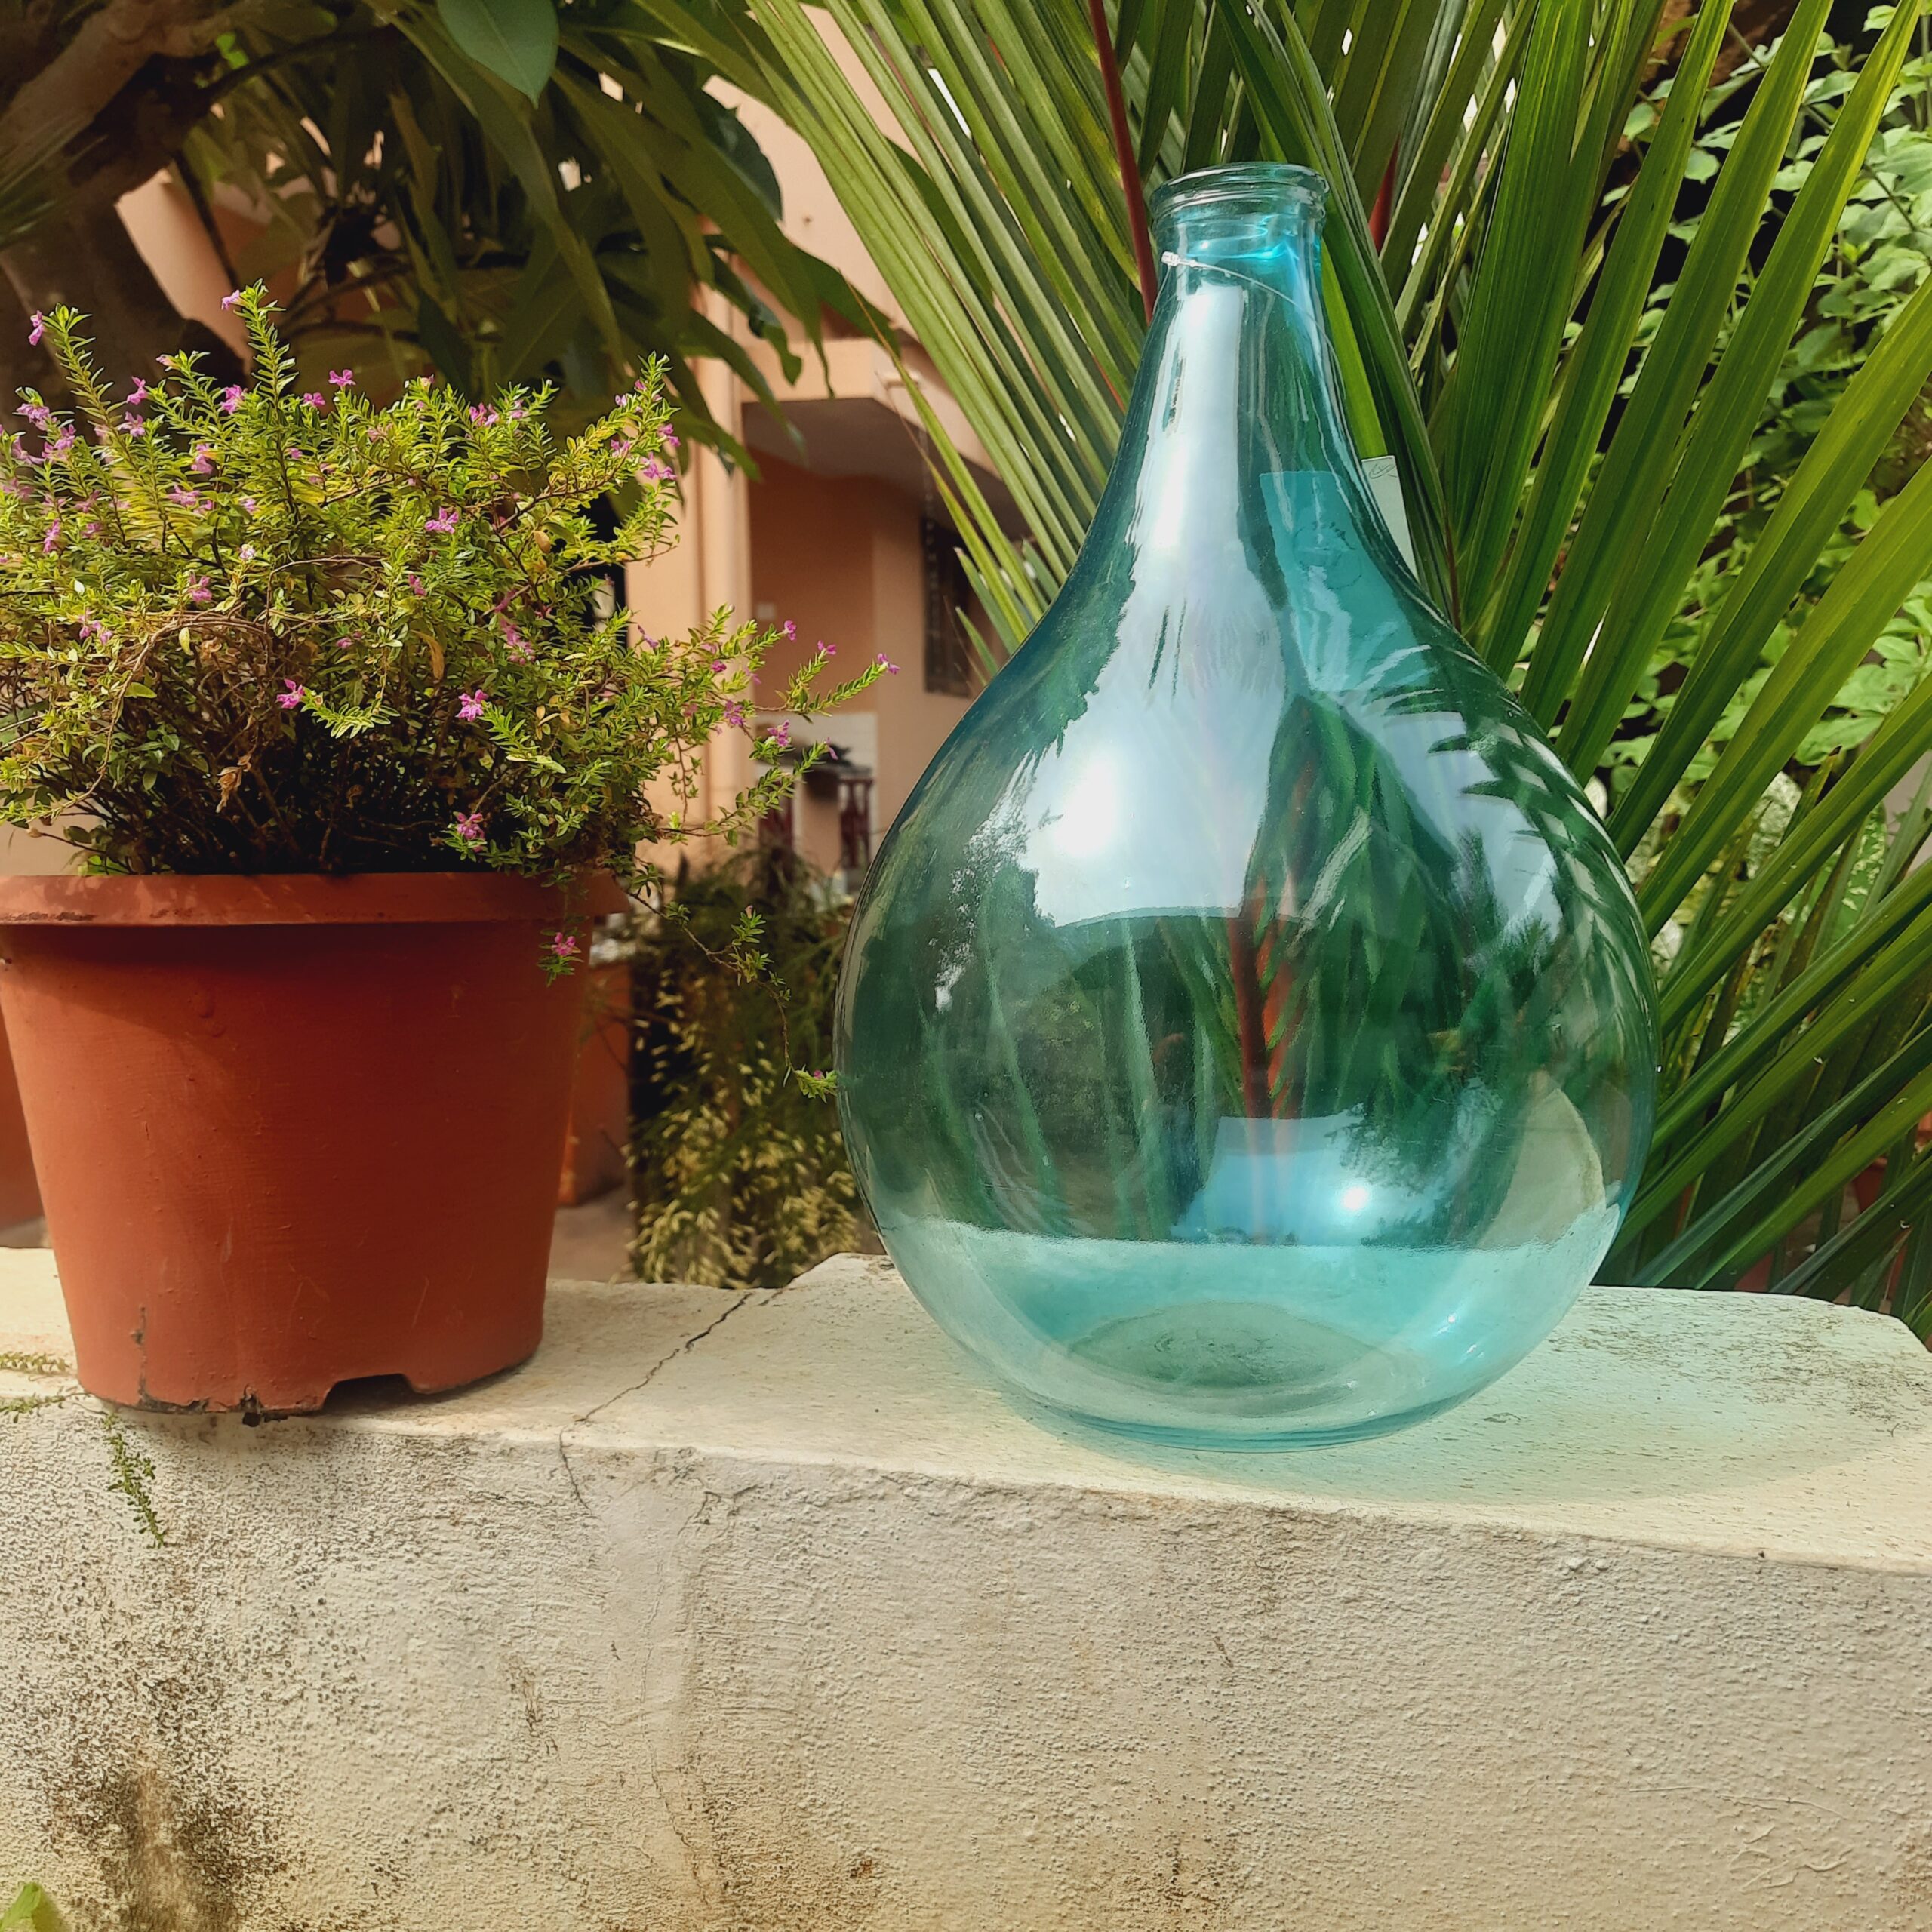 Demijohns in Indian Decor | Blue vintage demijohn with green plants in a garden